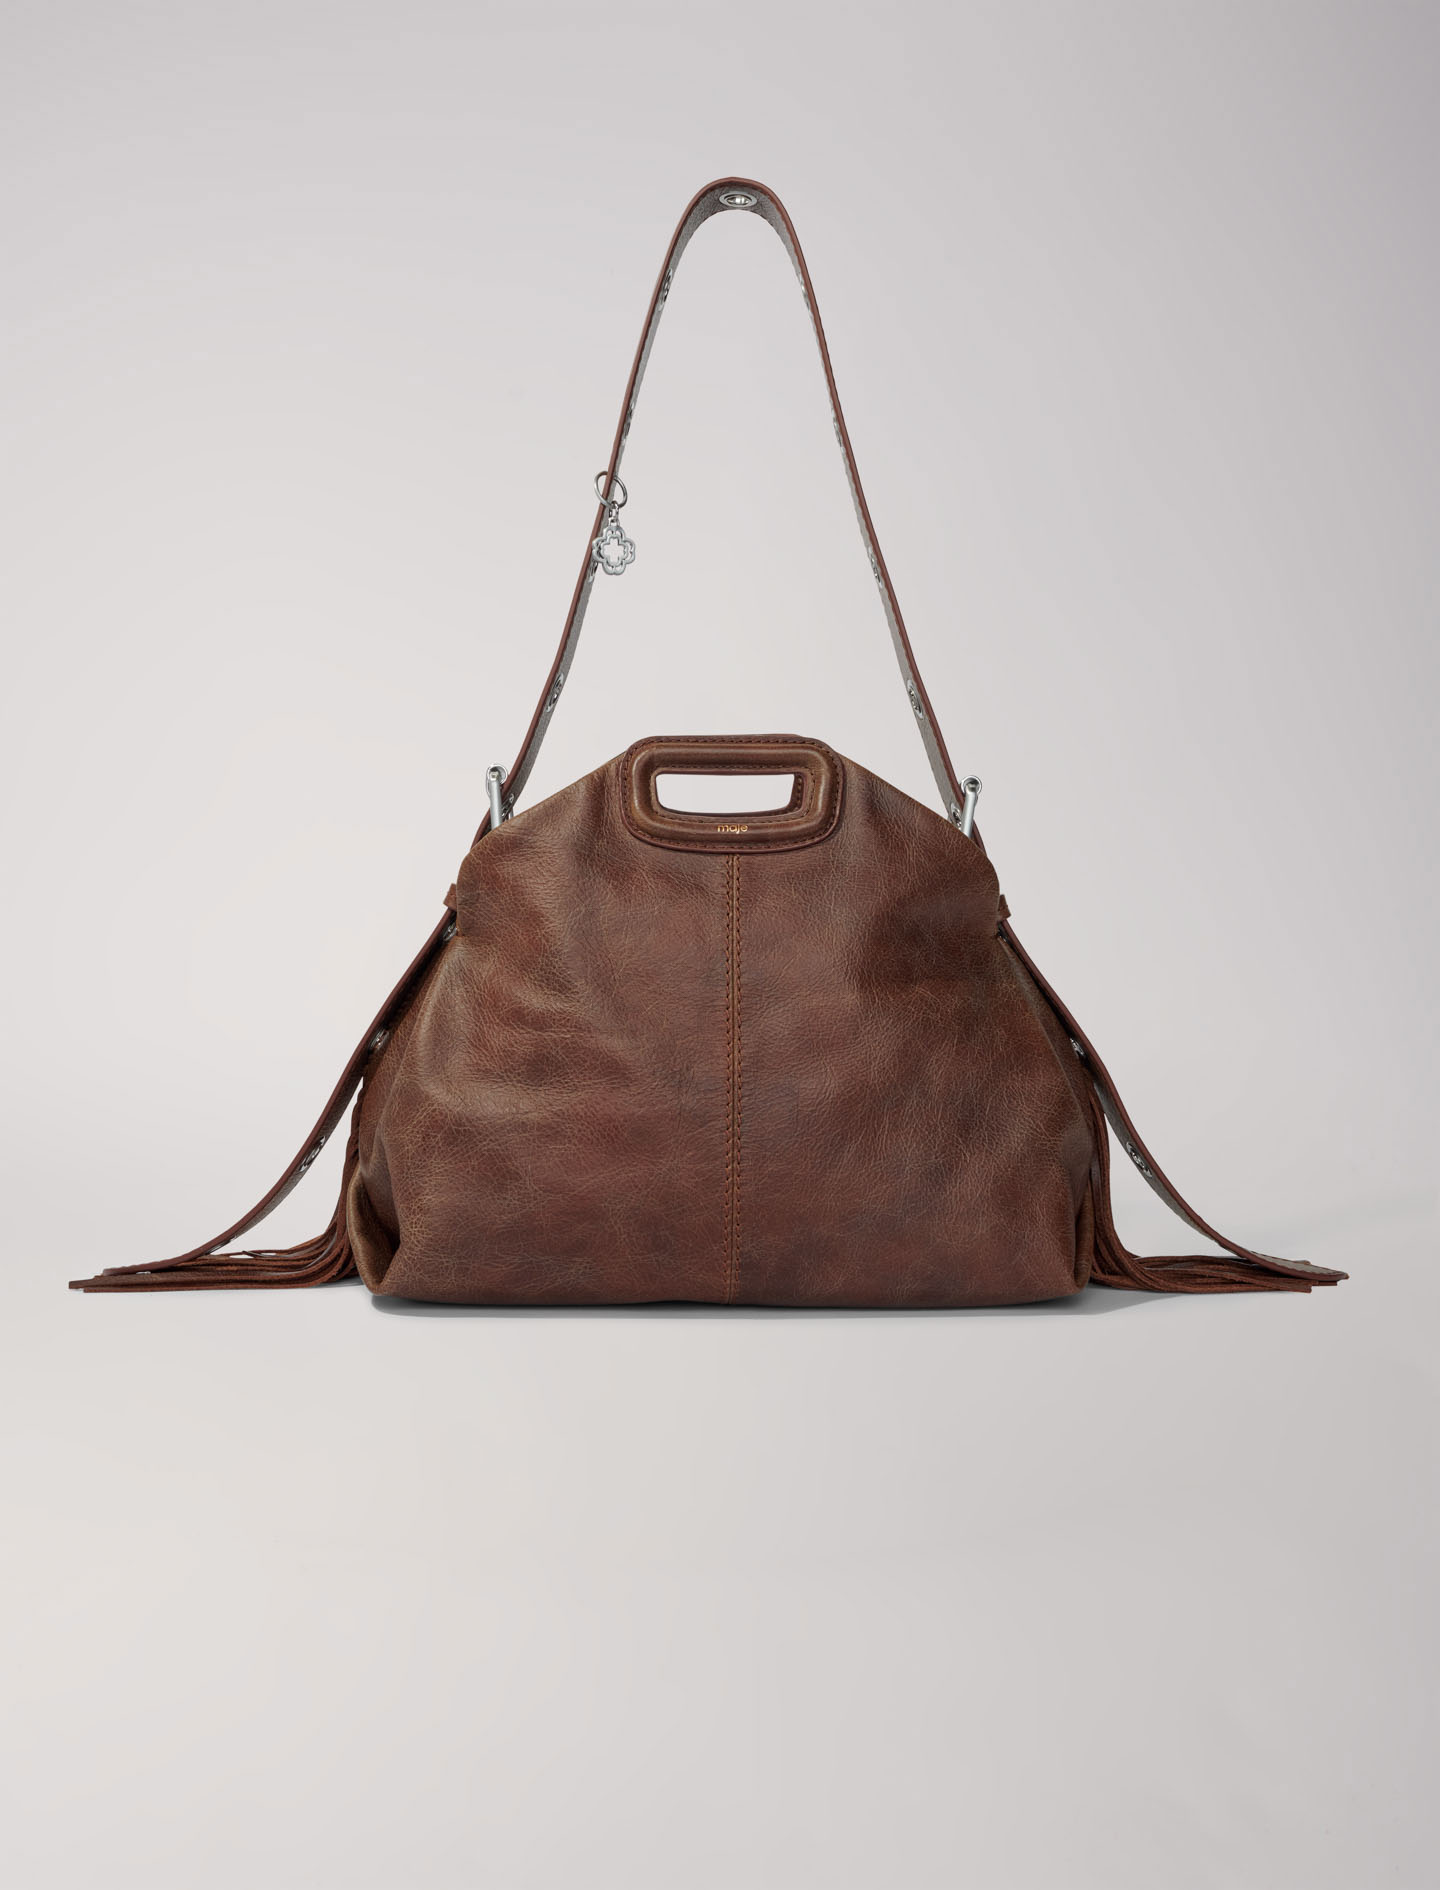 Mixte's polyester Leather: Miss M bag in vintage leather for Spring/Summer, size Mixte-All Bags-OS (ONE SIZE), in color Old Brown /